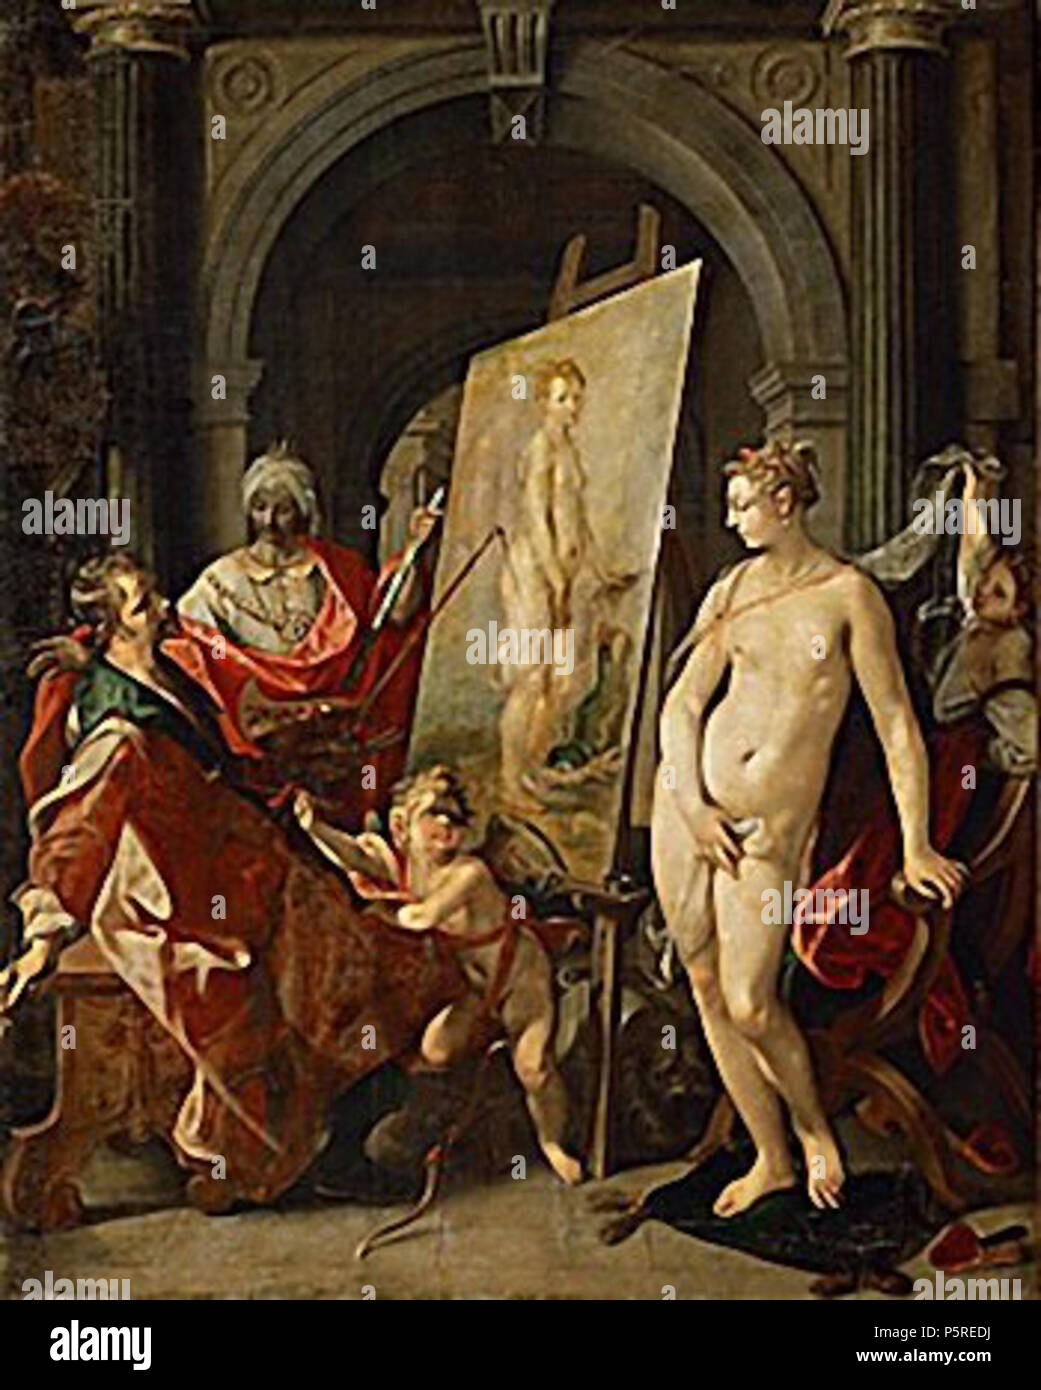 N/A.  English: Apelles paints Campaspe, painted by Joos van Winghe for the emperor Rudolph II. 210 x 175 cm Signed « IODOCVS.A.WINGHE » Kunsthistorisches Museum, Vienna, n° inv 1686 . circa 1600.    Joos van Winghe  (1544–1603)     Alternative names Jodocus van Wingen, Joos van Wingen, Josse van Wingen, Jost van Wingen, Jodocus van Winghe, Josse van Winghe, Jost van Winghe, Jodocus van Winghen, Joos van Winghen, Josse van Winghen, Jost van Winghen, Iodocus Wingius  Description Flemish-German painter and draughtsman  Date of birth/death 1544 18 December 1603  Location of birth/death Brussels Fr Stock Photo